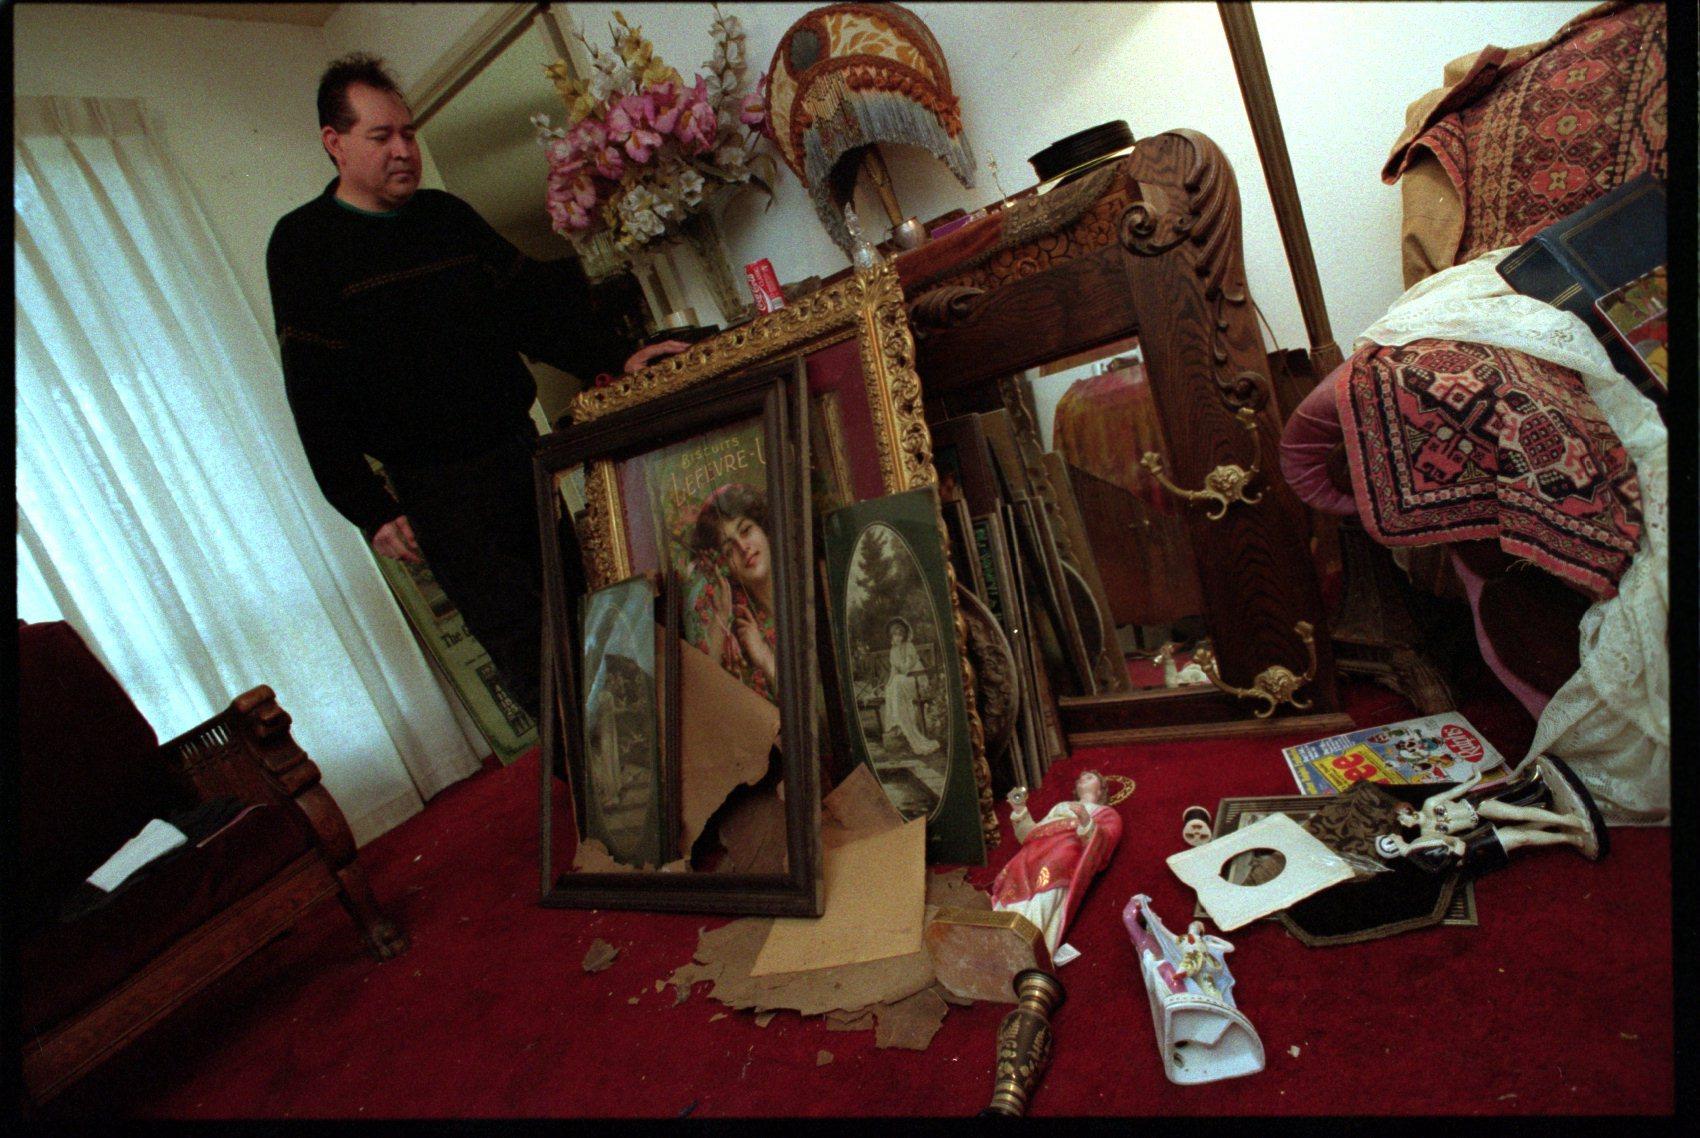 Rick Olguin of Lake View Terrace stands next to rare Victorian paintings from his collection after the 1994 Northridge earthquake. About 50 were damaged in the quake. 